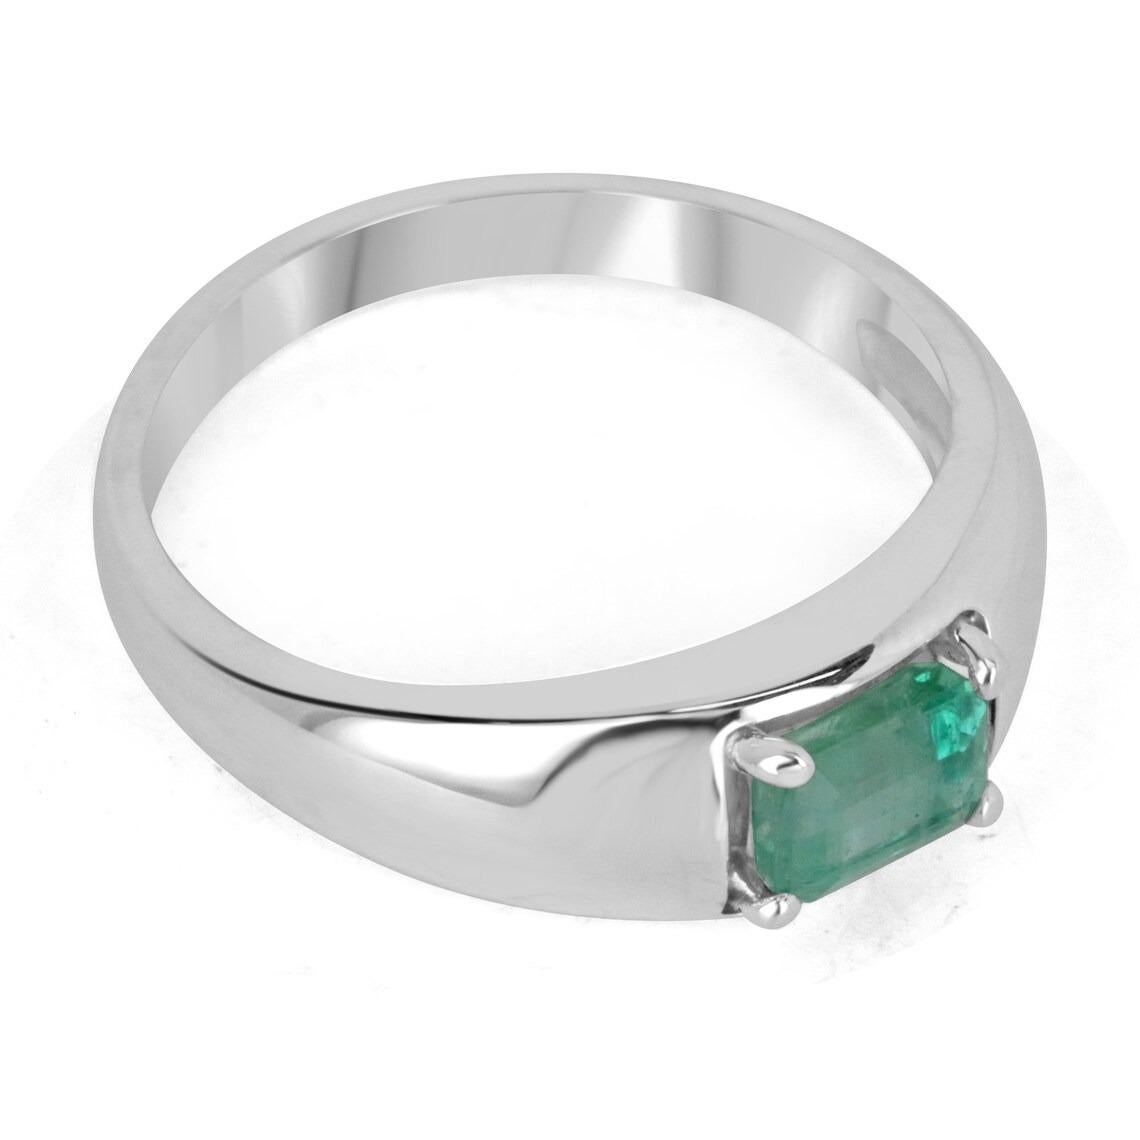 A dapper natural emerald-emerald cut solitaire ring. This exquisite piece features a gorgeous emerald cut emerald from the mines of Zambia. The gemstone showcases a beautiful shine, mossy medium green color, and very good luster. Four-prong set in a